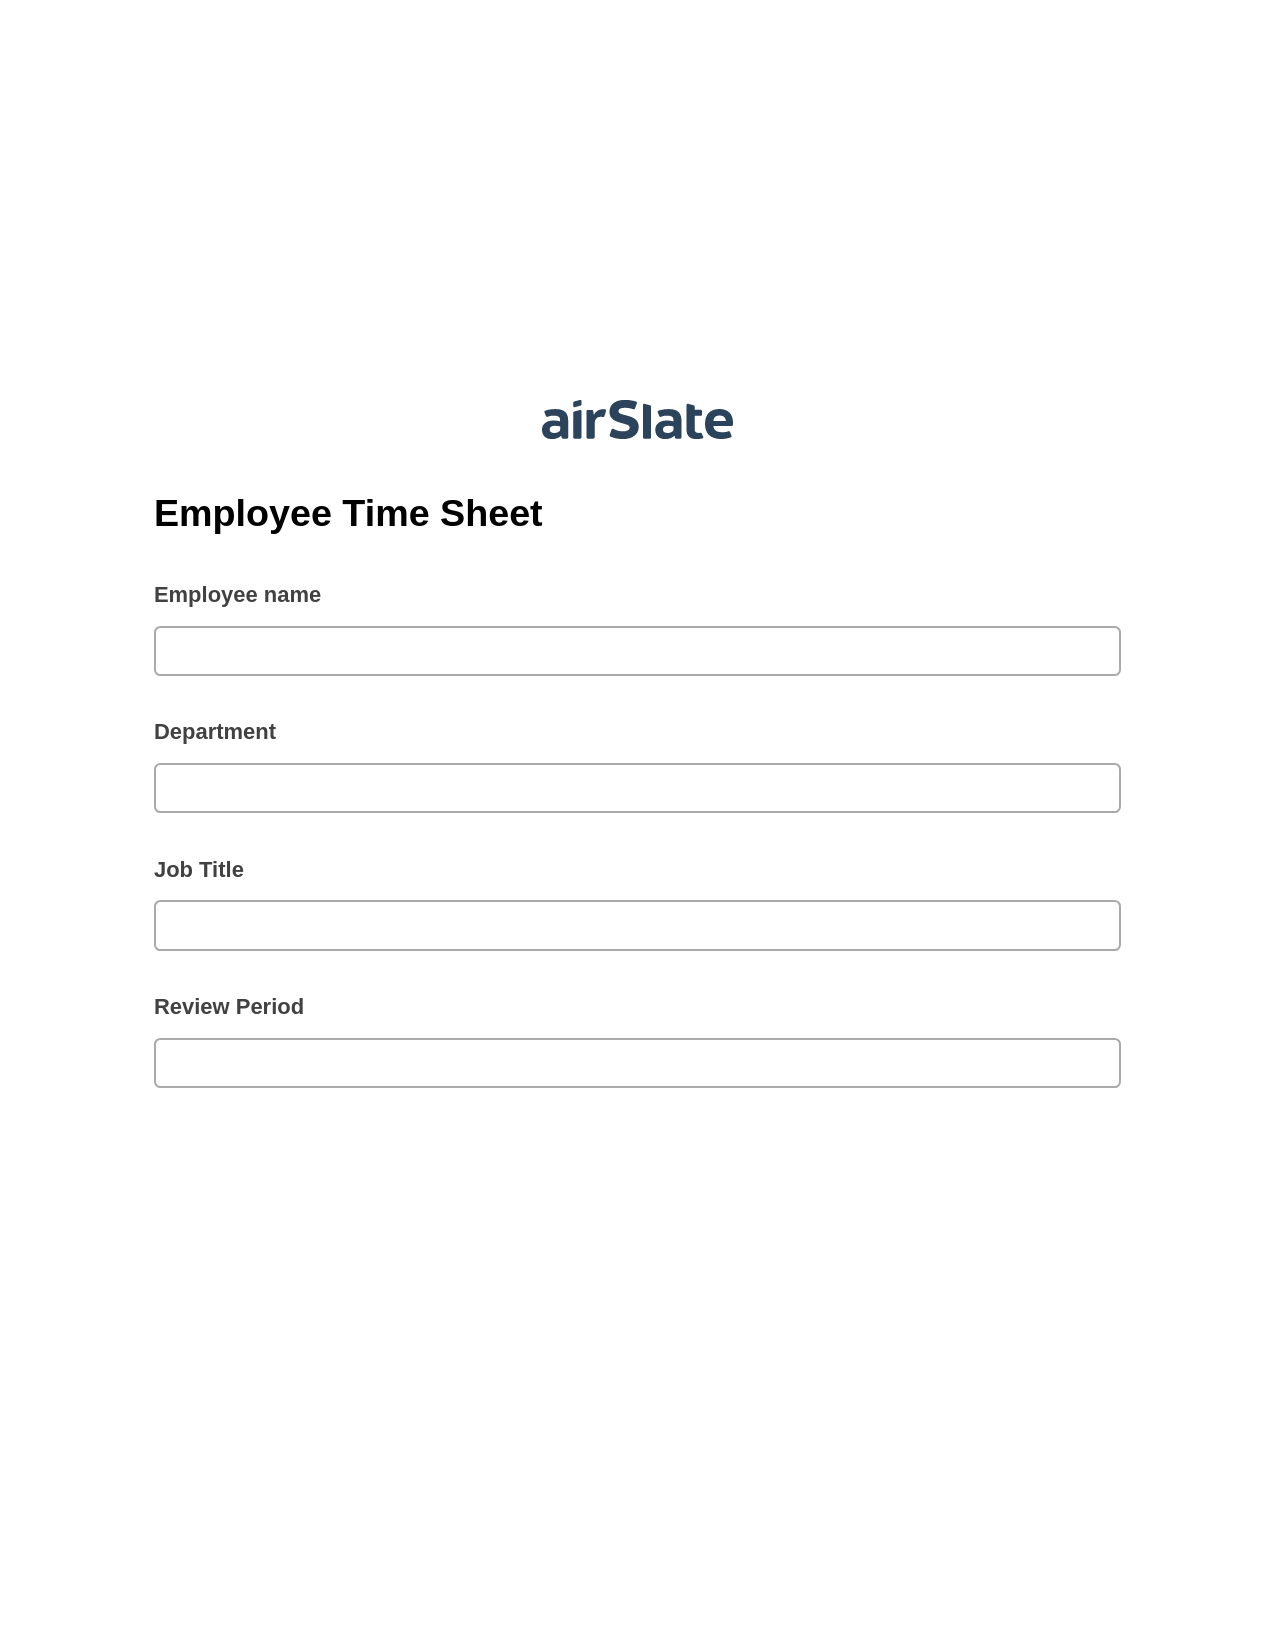 Employee Time Sheet Pre-fill from CSV File Bot, Create Salesforce Records Bot, Text Message Notification Postfinish Bot